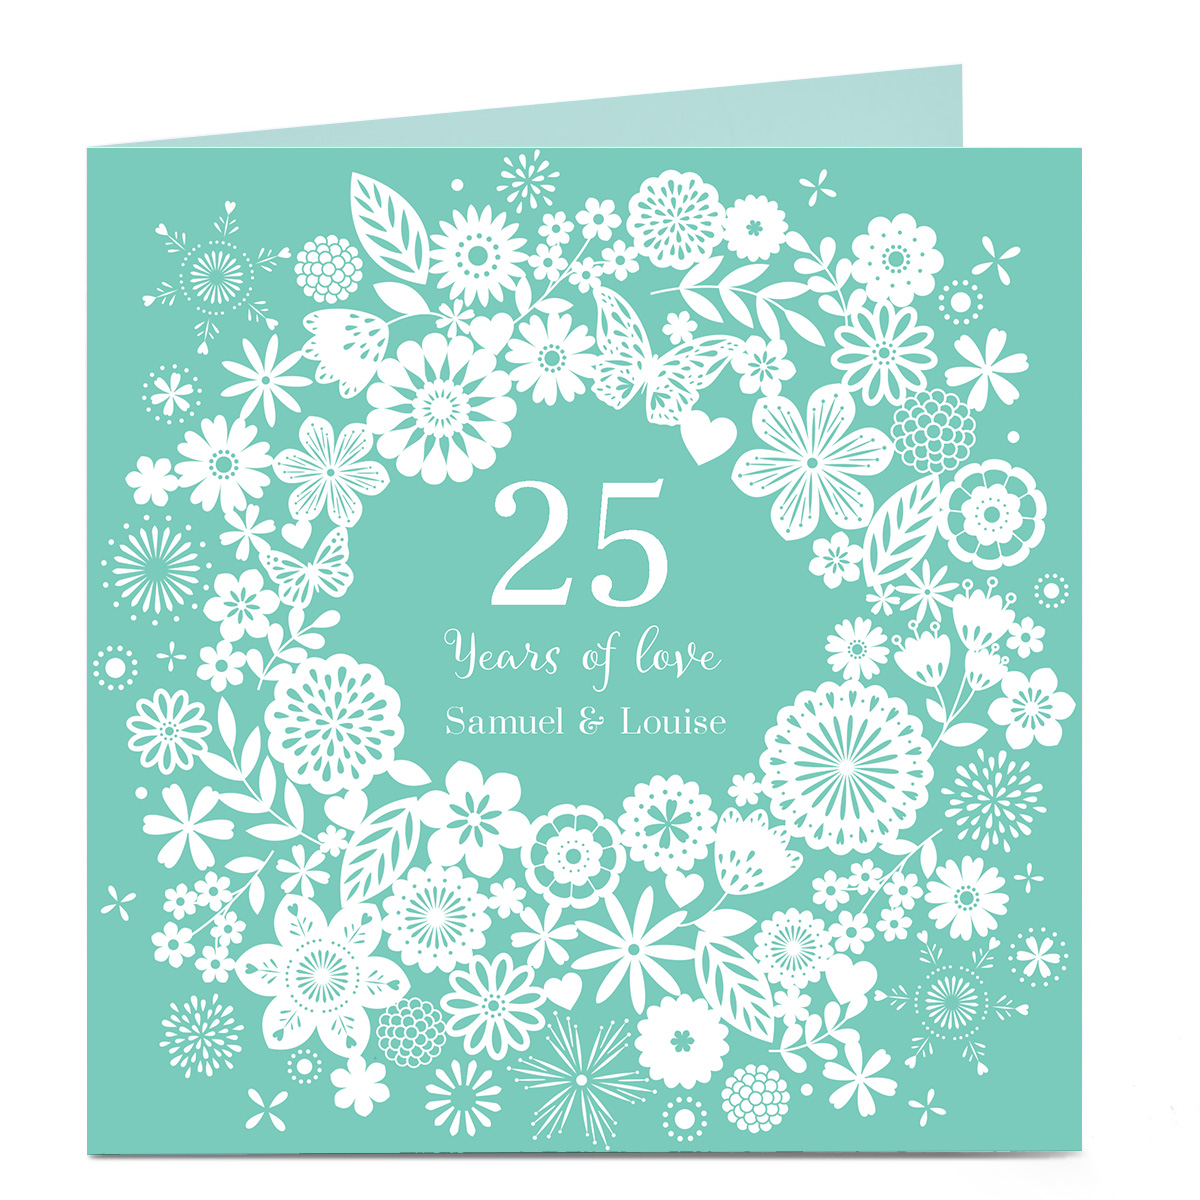 Personalised Anniversary Card - Blue Paper Cut Out